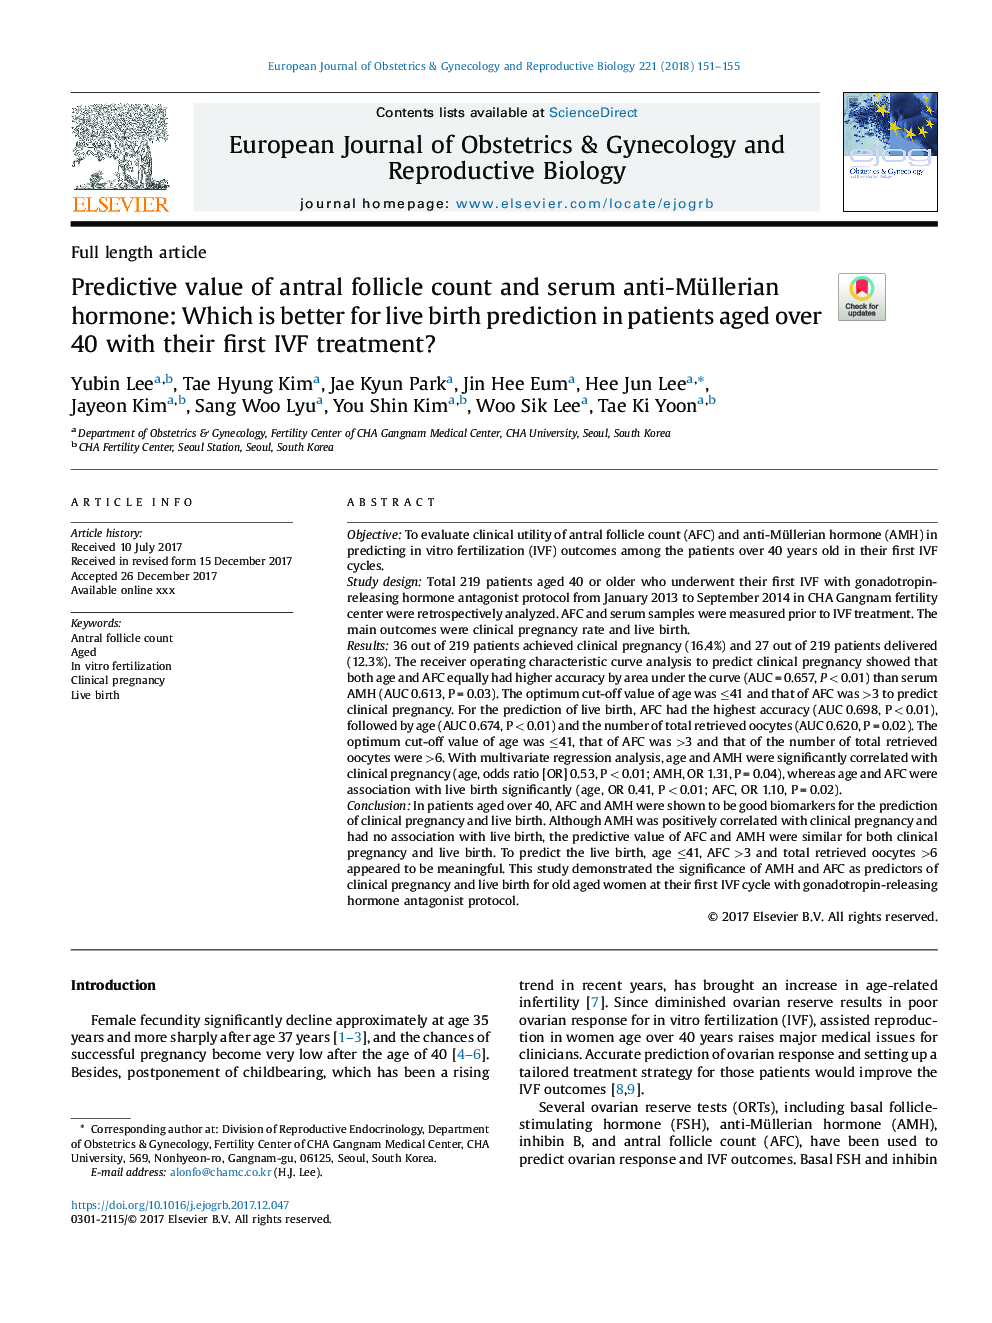 Predictive value of antral follicle count and serum anti-Müllerian hormone: Which is better for live birth prediction in patients aged over 40 with their first IVF treatment?